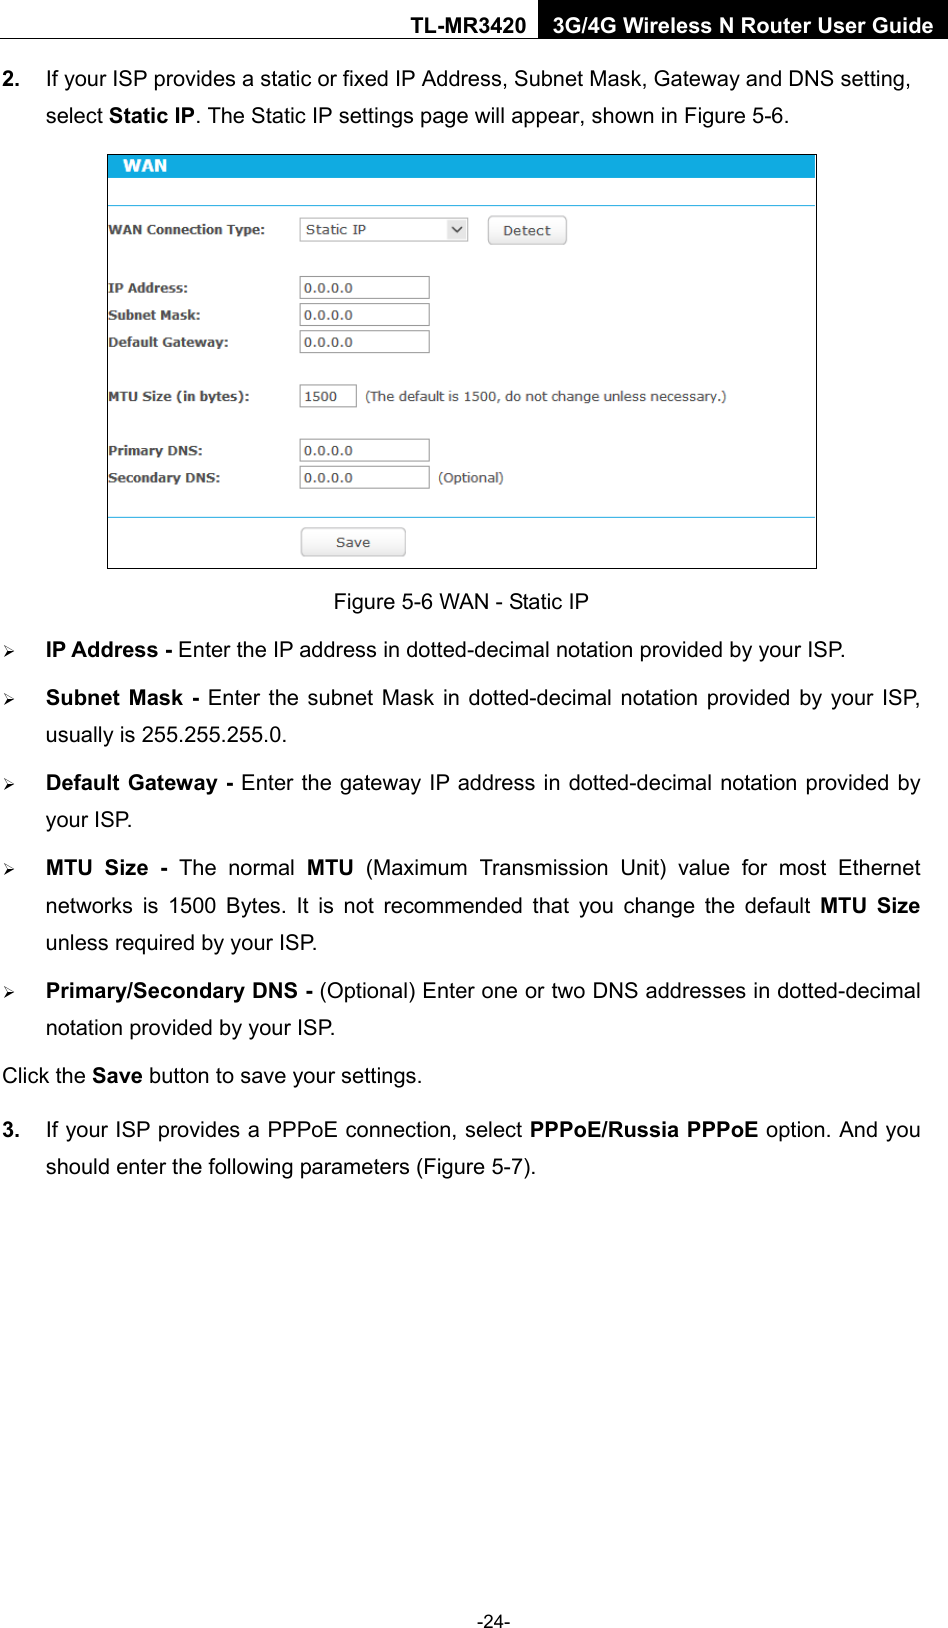    -24- TL-MR3420 3G/4G Wireless N Router User Guide 2. If your ISP provides a static or fixed IP Address, Subnet Mask, Gateway and DNS setting, select Static IP. The Static IP settings page will appear, shown in Figure 5-6.  Figure 5-6 WAN - Static IP  IP Address - Enter the IP address in dotted-decimal notation provided by your ISP.  Subnet Mask - Enter the subnet Mask in dotted-decimal notation provided by your ISP, usually is 255.255.255.0.  Default Gateway - Enter the gateway IP address in dotted-decimal notation provided by your ISP.  MTU Size -  The normal MTU (Maximum Transmission Unit) value for most Ethernet networks is 1500 Bytes. It is not recommended that you change the default MTU Size unless required by your ISP.    Primary/Secondary DNS - (Optional) Enter one or two DNS addresses in dotted-decimal notation provided by your ISP. Click the Save button to save your settings. 3. If your ISP provides a PPPoE connection, select PPPoE/Russia PPPoE option. And you should enter the following parameters (Figure 5-7). 